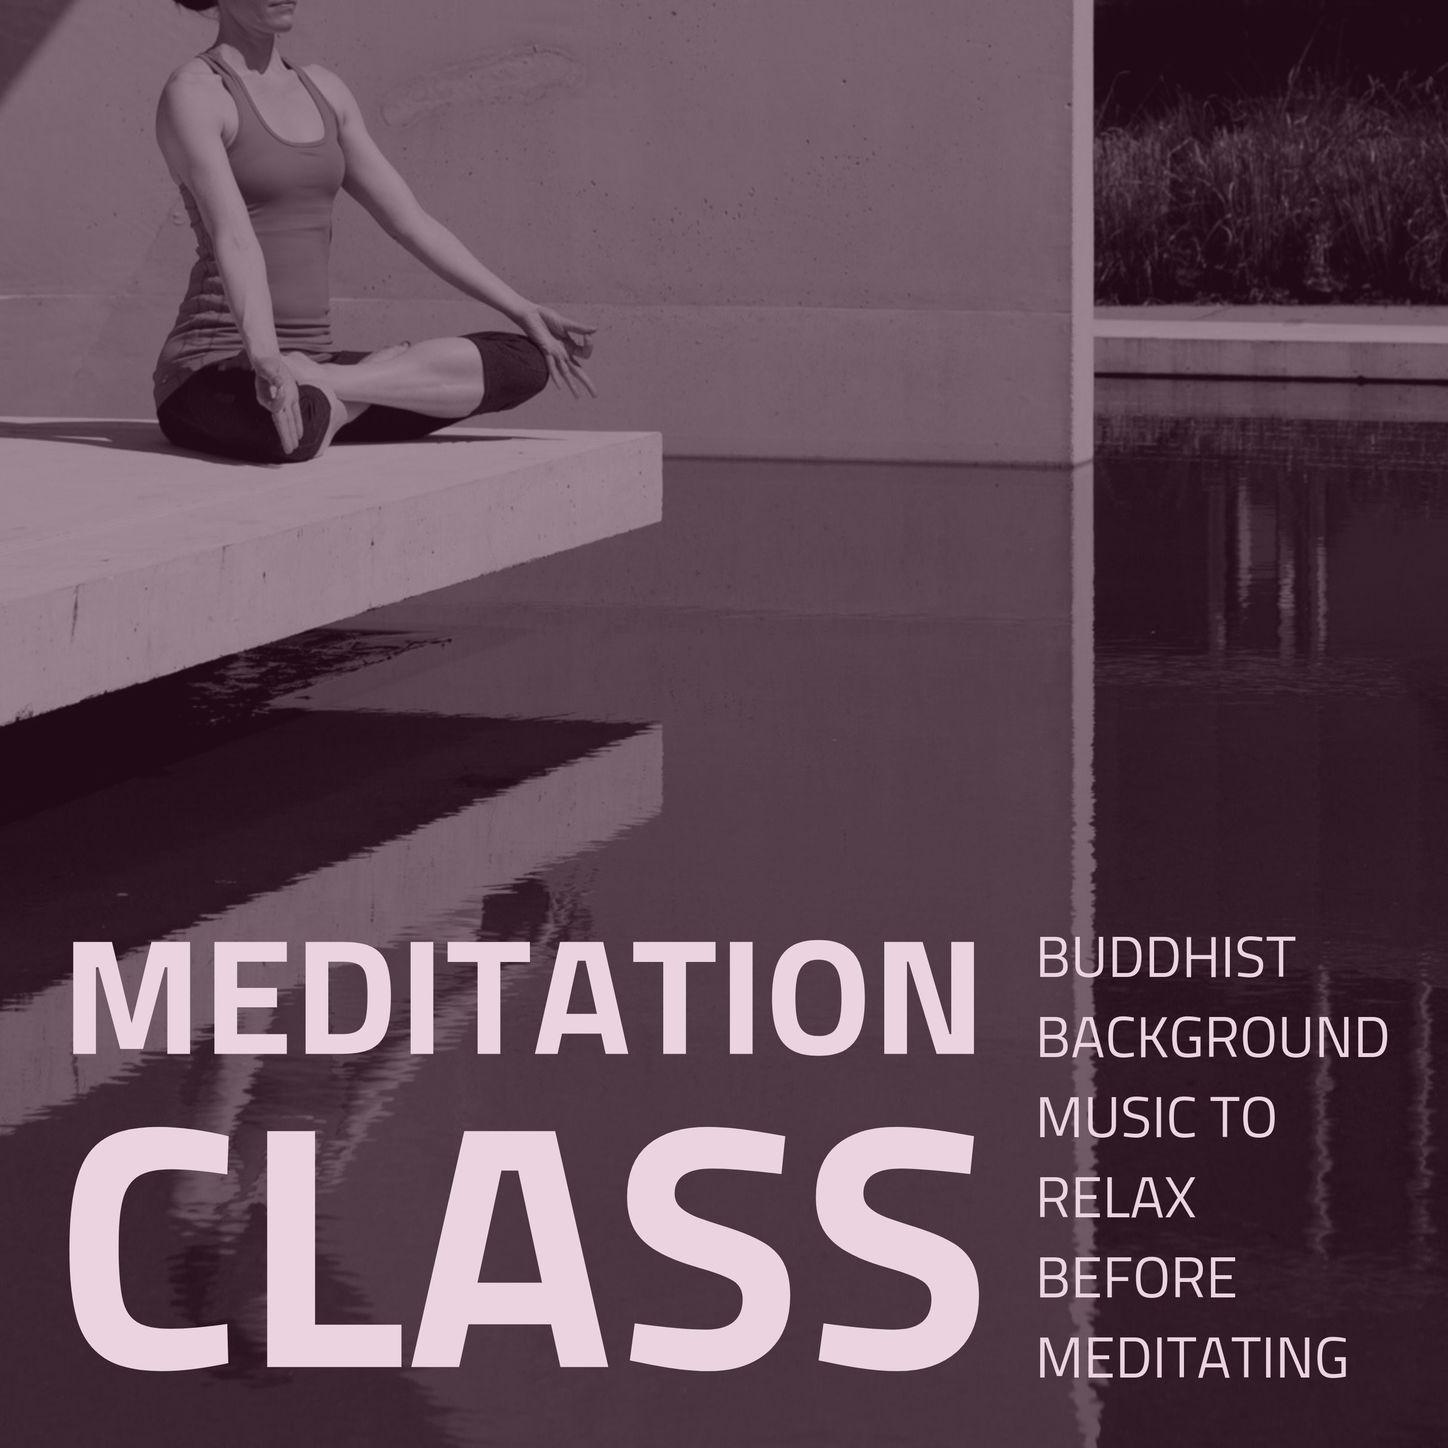 Meditation Class: Buddhist Background Music to Relax Before Meditating